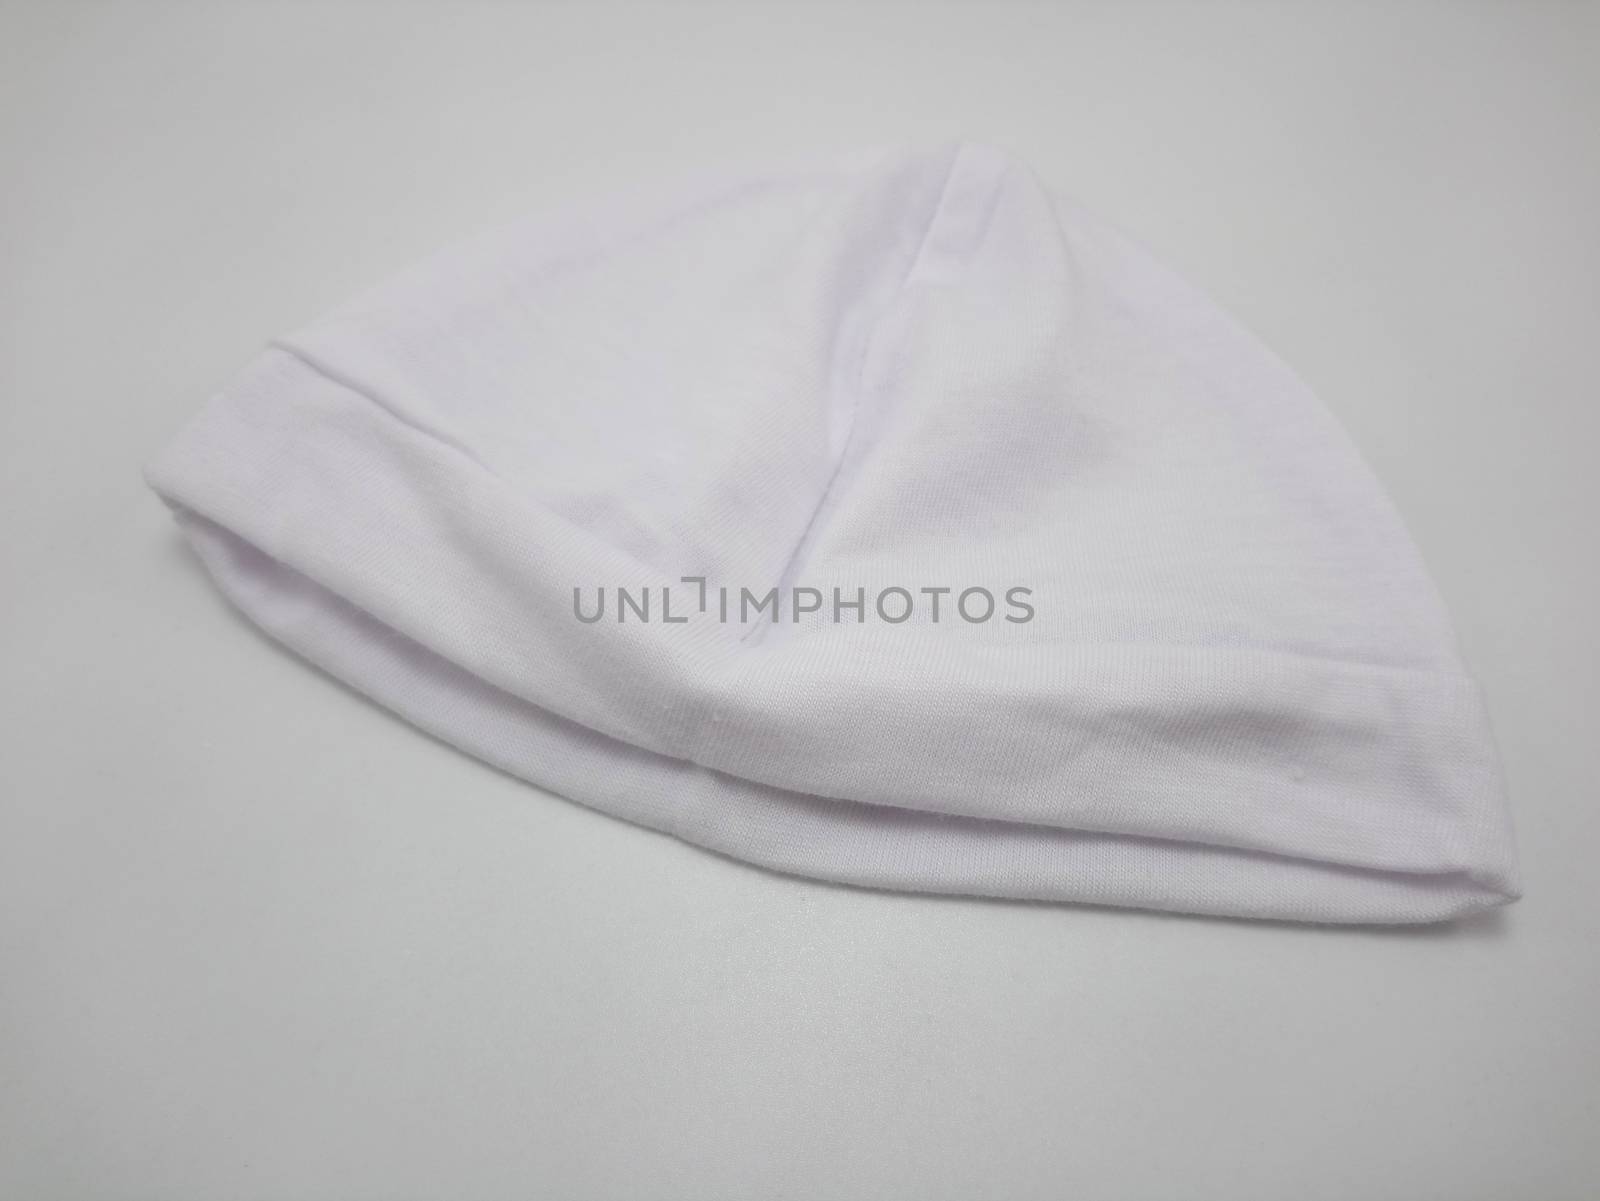 White plain baby head bonnet use to cover the head of person during cold condition